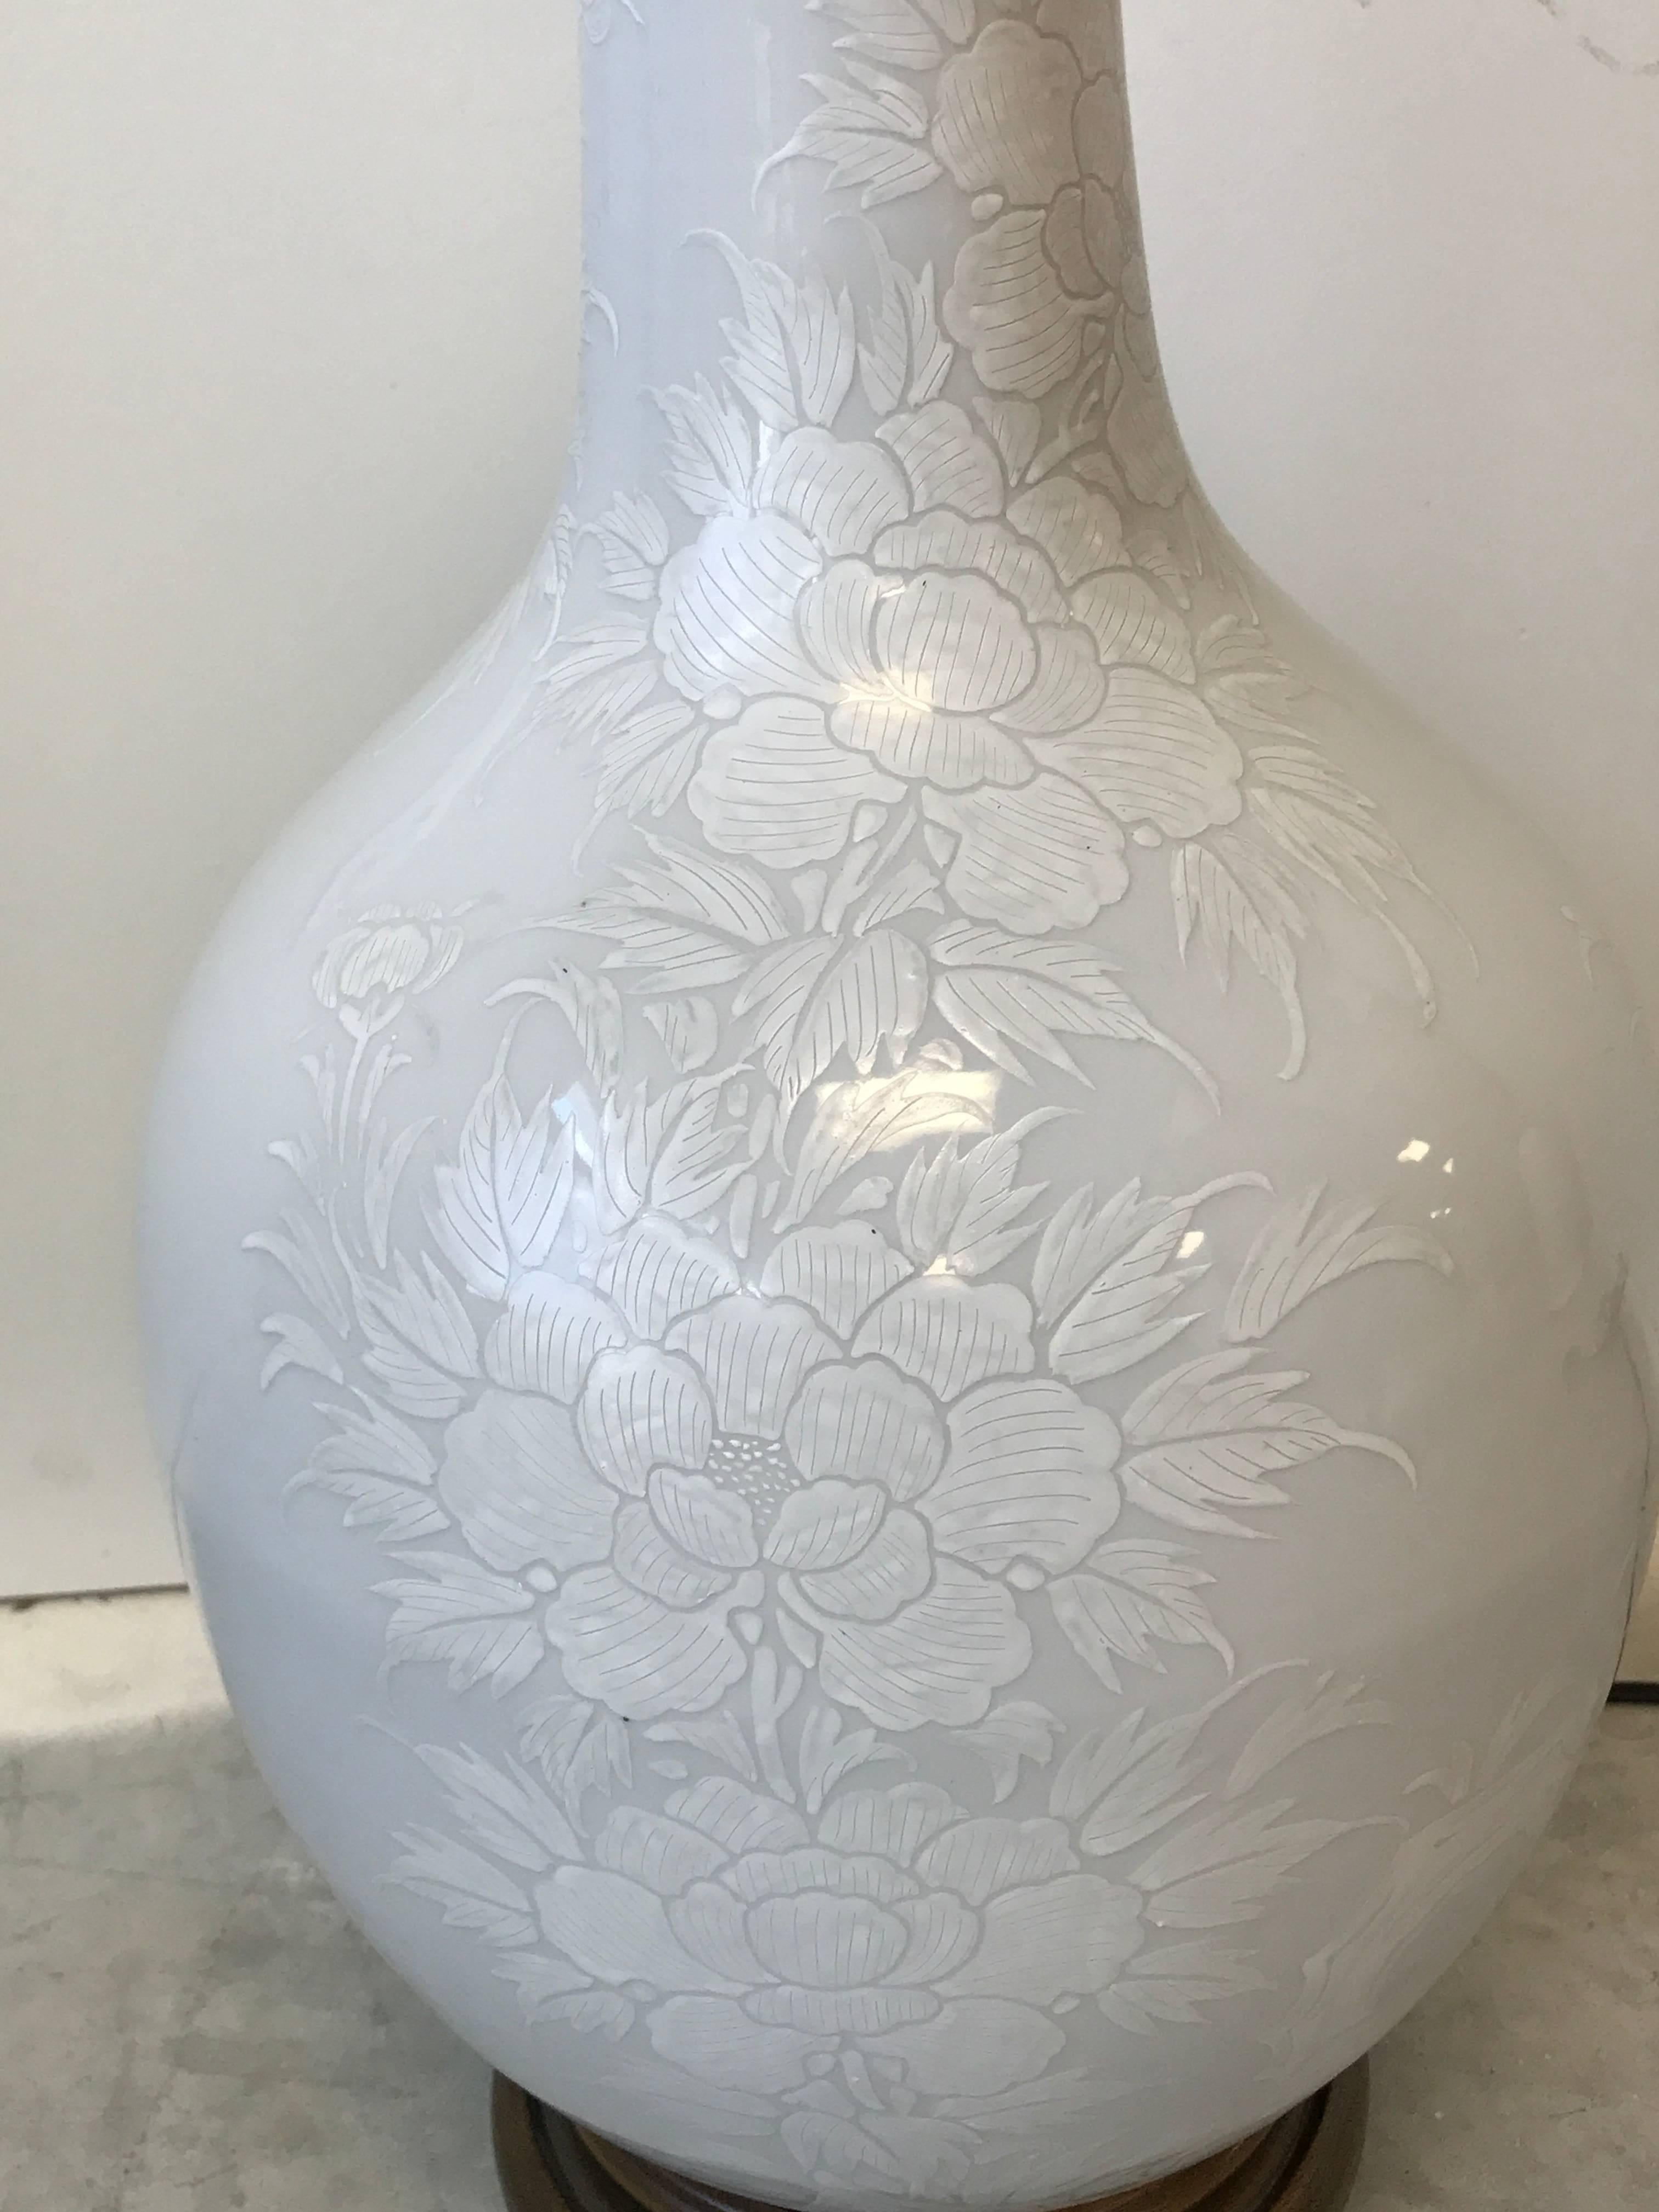 1960s Large Blanc de Chine Lamp with Hand-Painted Monochrome Floral Motif In Good Condition For Sale In Richmond, VA